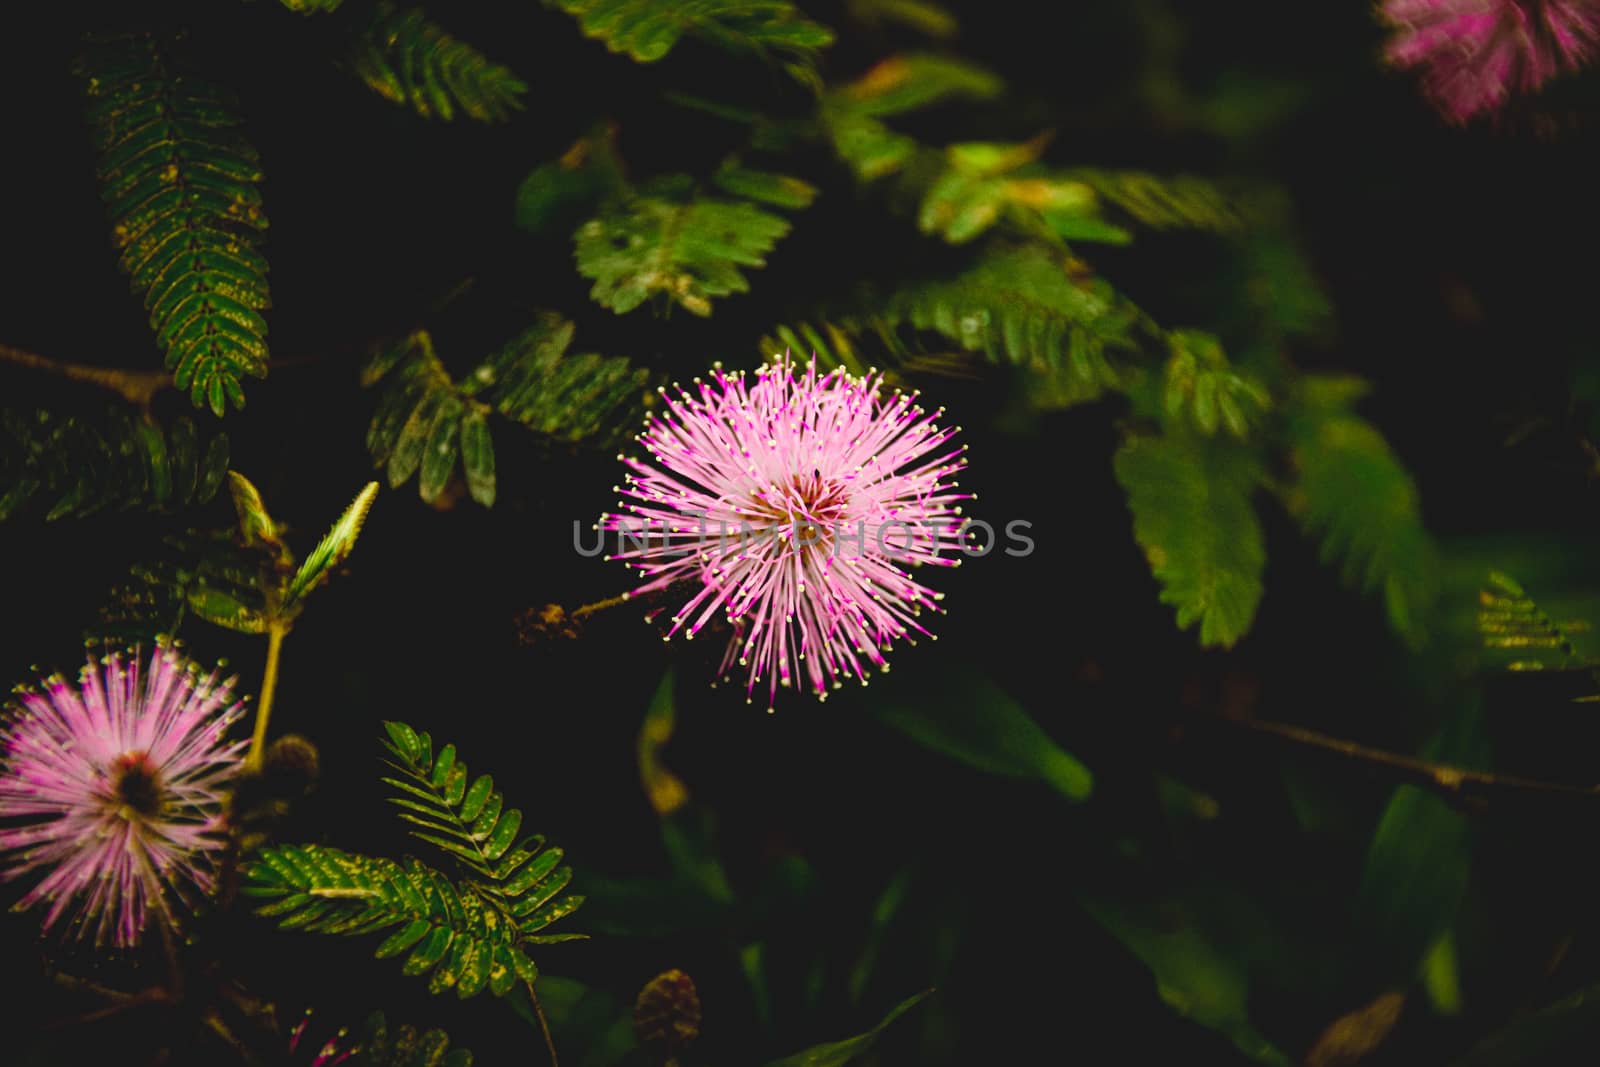 Mimosa pudica or Shameplant flower in low light to show concept of moody floral spring theme